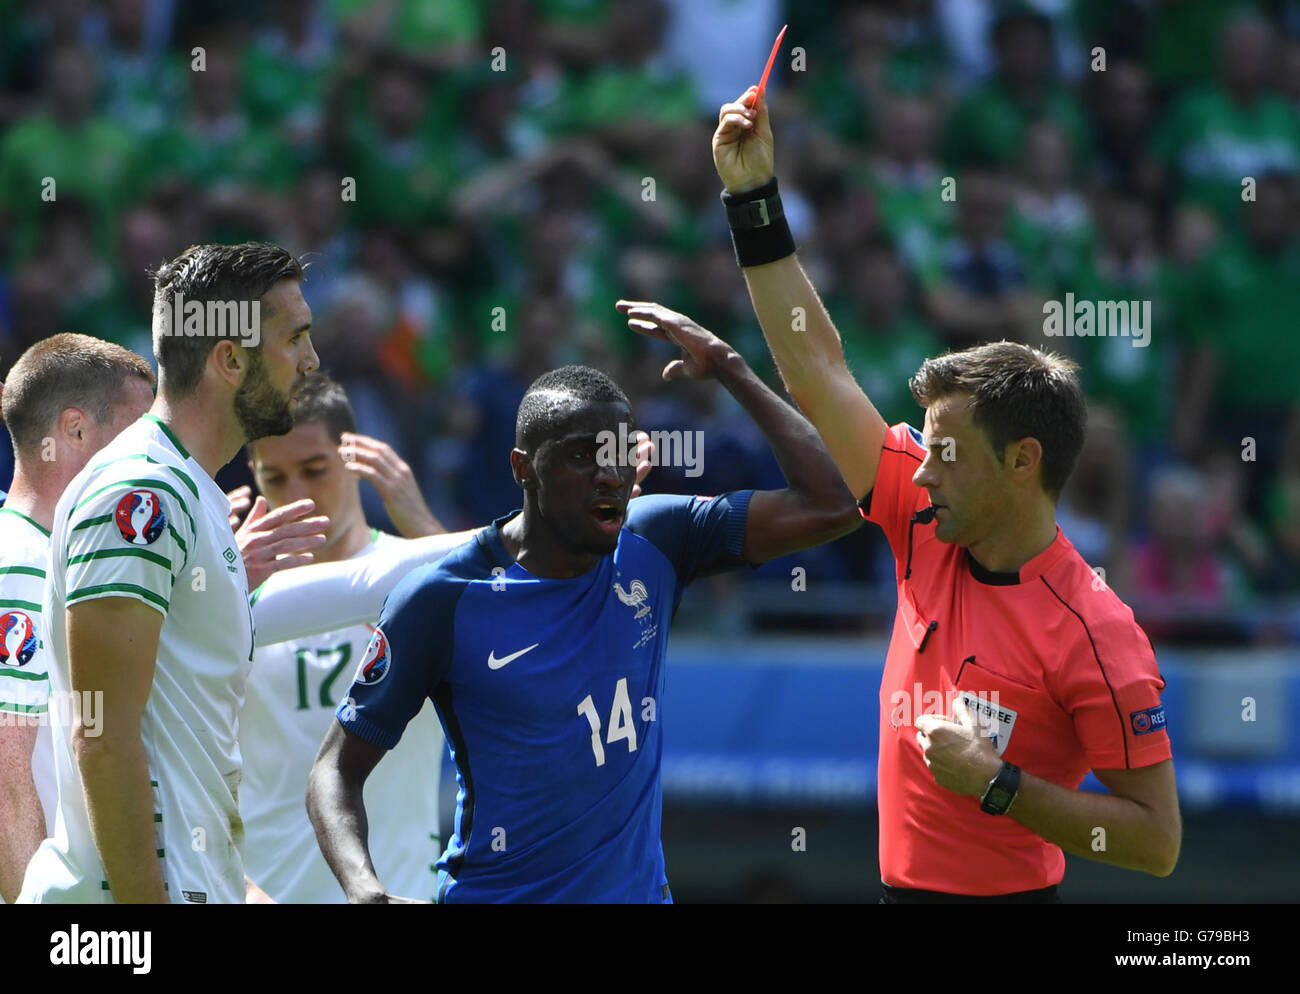 Lyon, France. 26th June, 2016. Republic of Ireland's Shane (L) is shown a referee Nicola Rizzoli for a foul on France's Antoine Griezmann during the Euro 2016 round